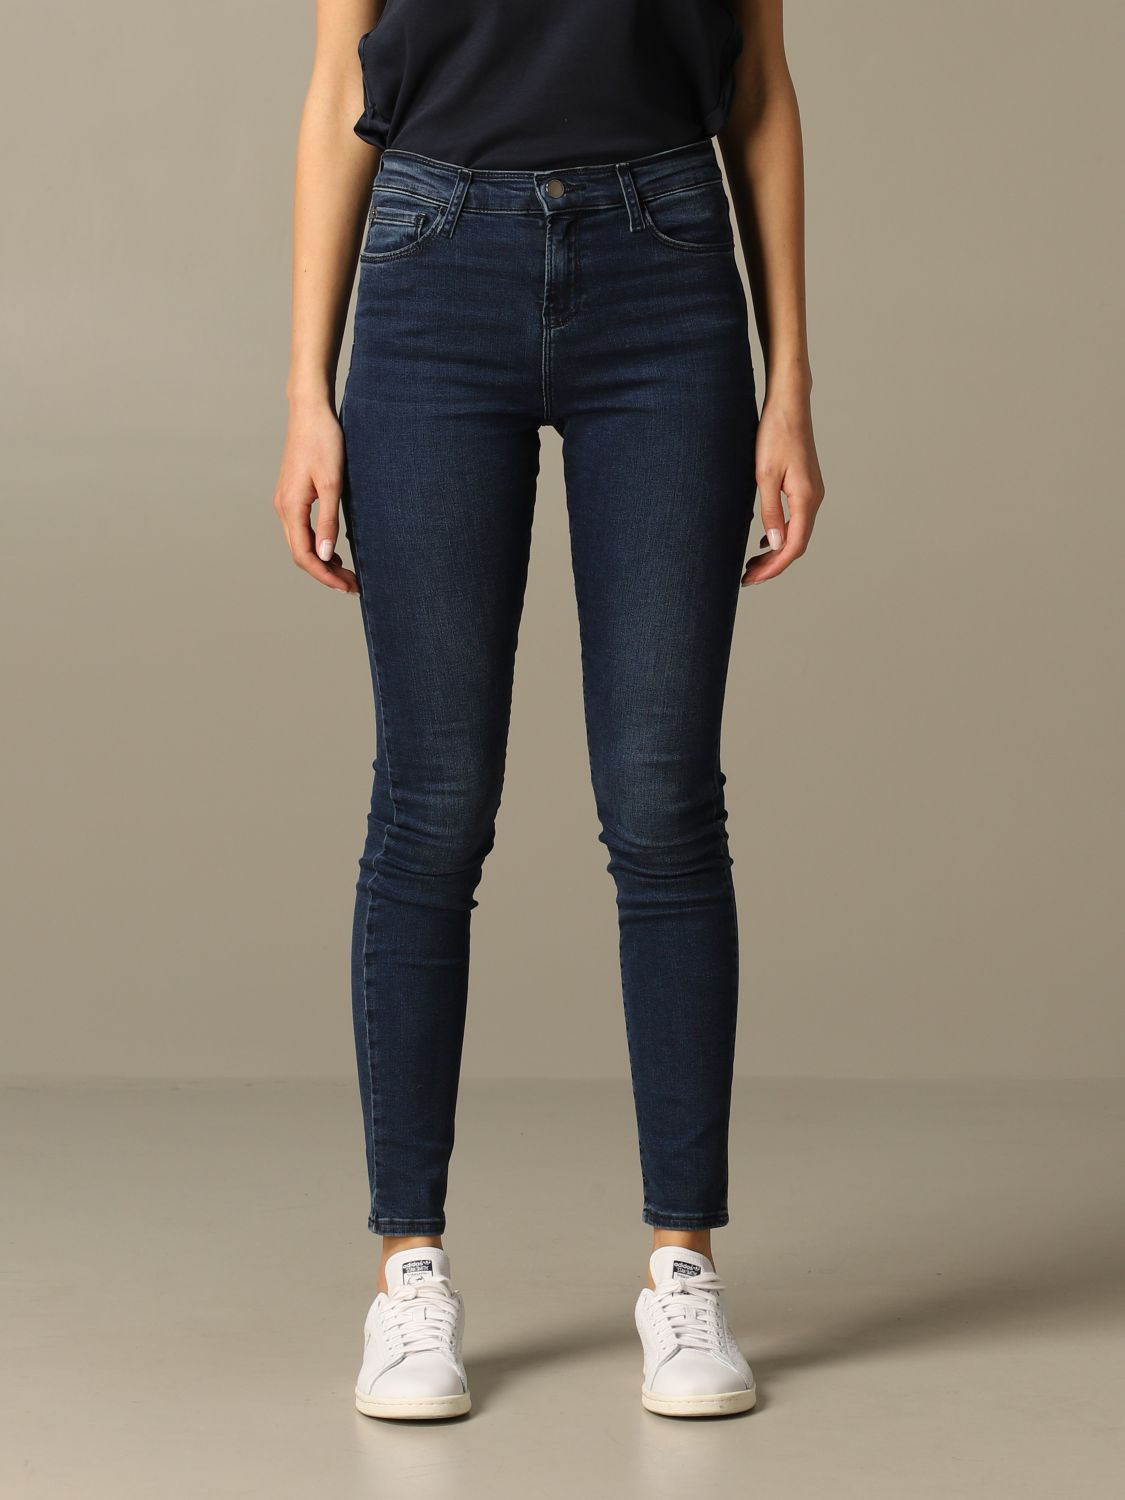 Emporio Armani Outlet: jeans for woman - Denim | Emporio Armani jeans 2D3LZ online at GIGLIO.COM